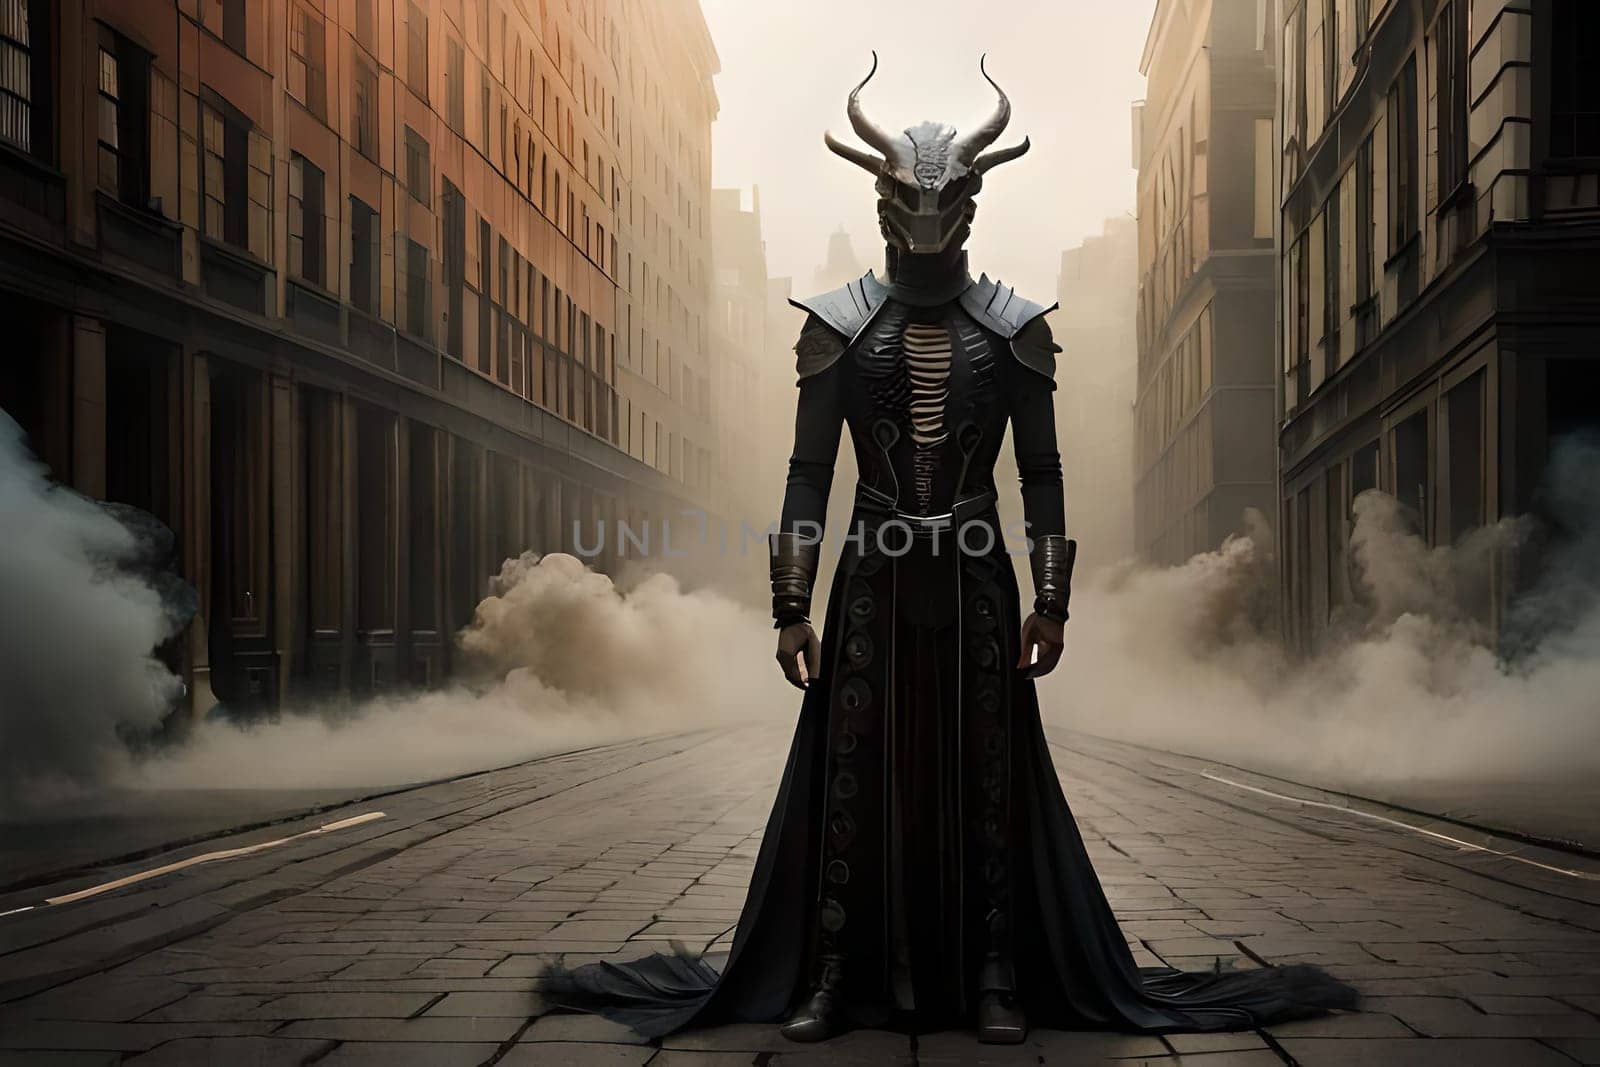 A painting of a man with a black mask and horns. by milastokerpro